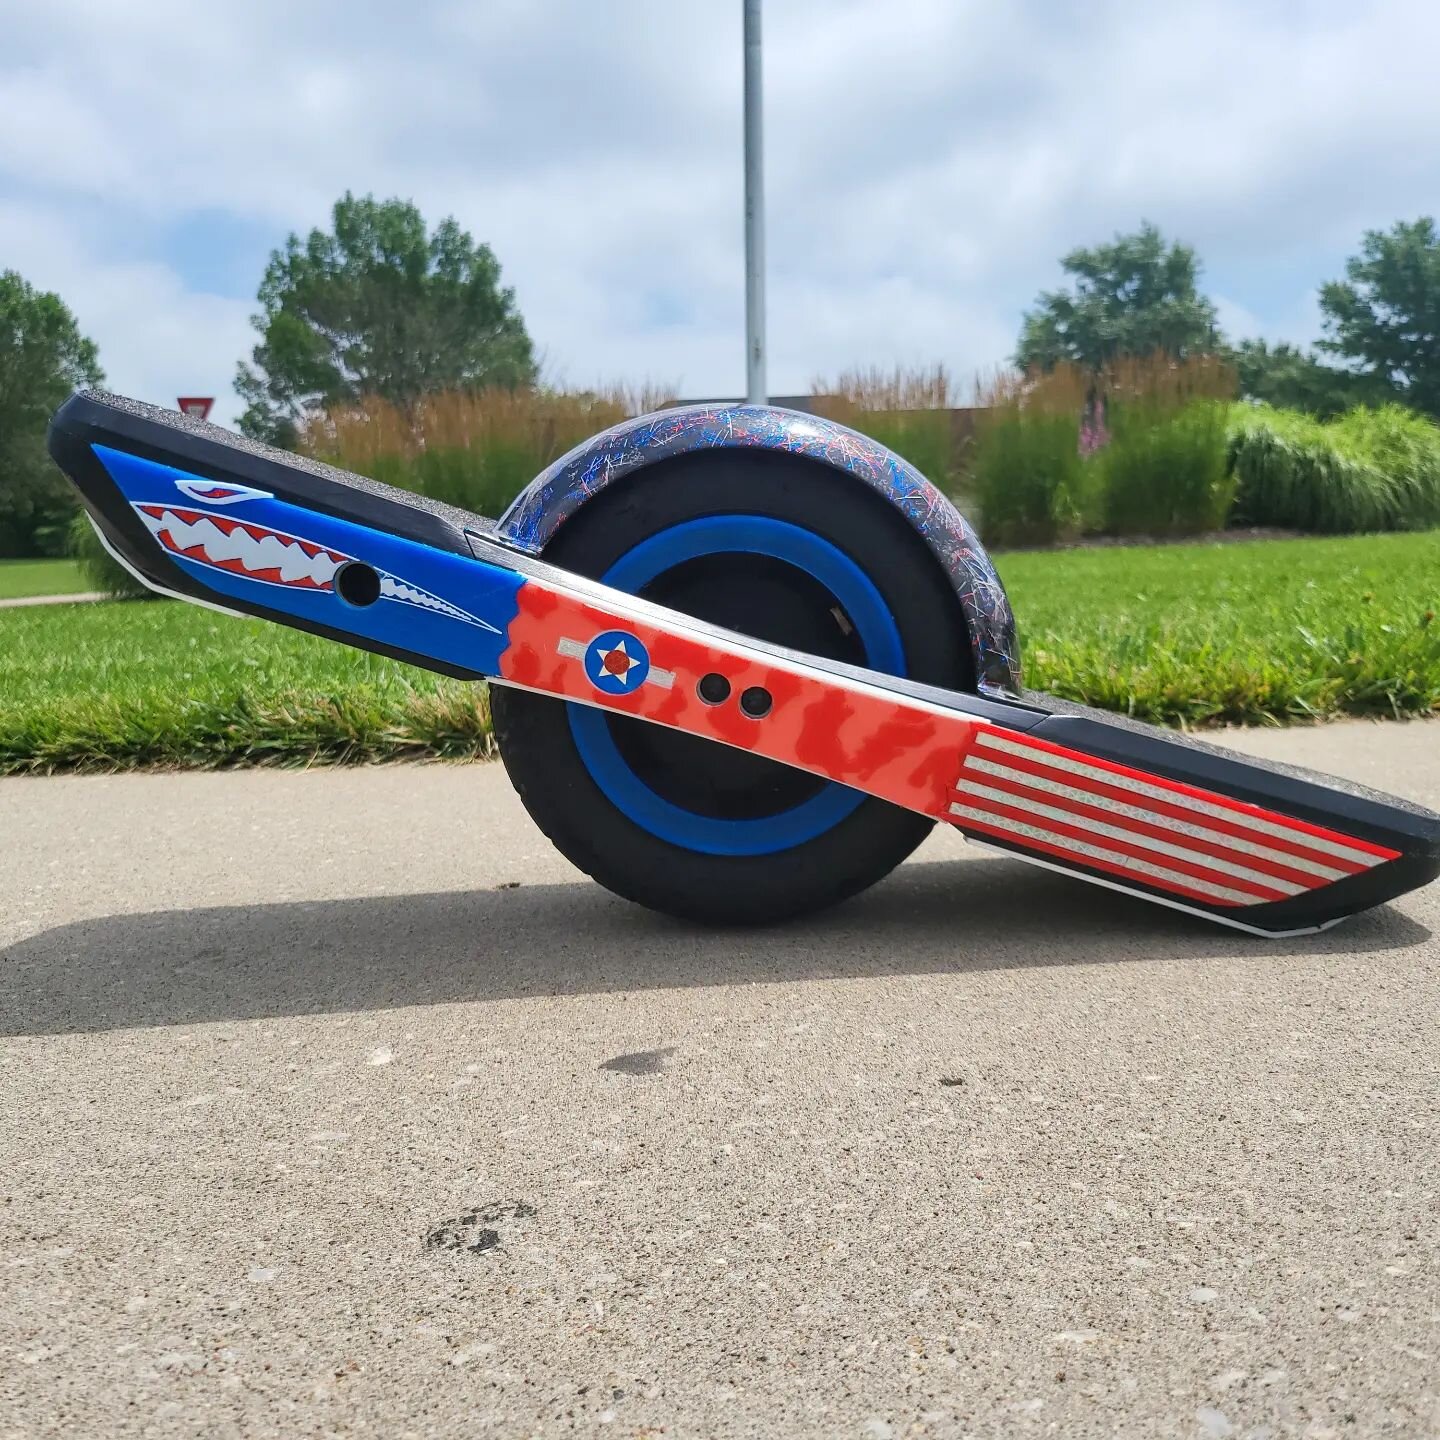 Happy 4th of July from @elitecustomsow 
Warhawk - Patriot 

$10 off all orders this though the 7th

#onewheel #elitecustomsow #shred #USA #warhawk #patriot #onewheelv1 #onewheelplus #onewheelxr #onewheelpint #onewheelpintx #onewheelgt #customonewheel